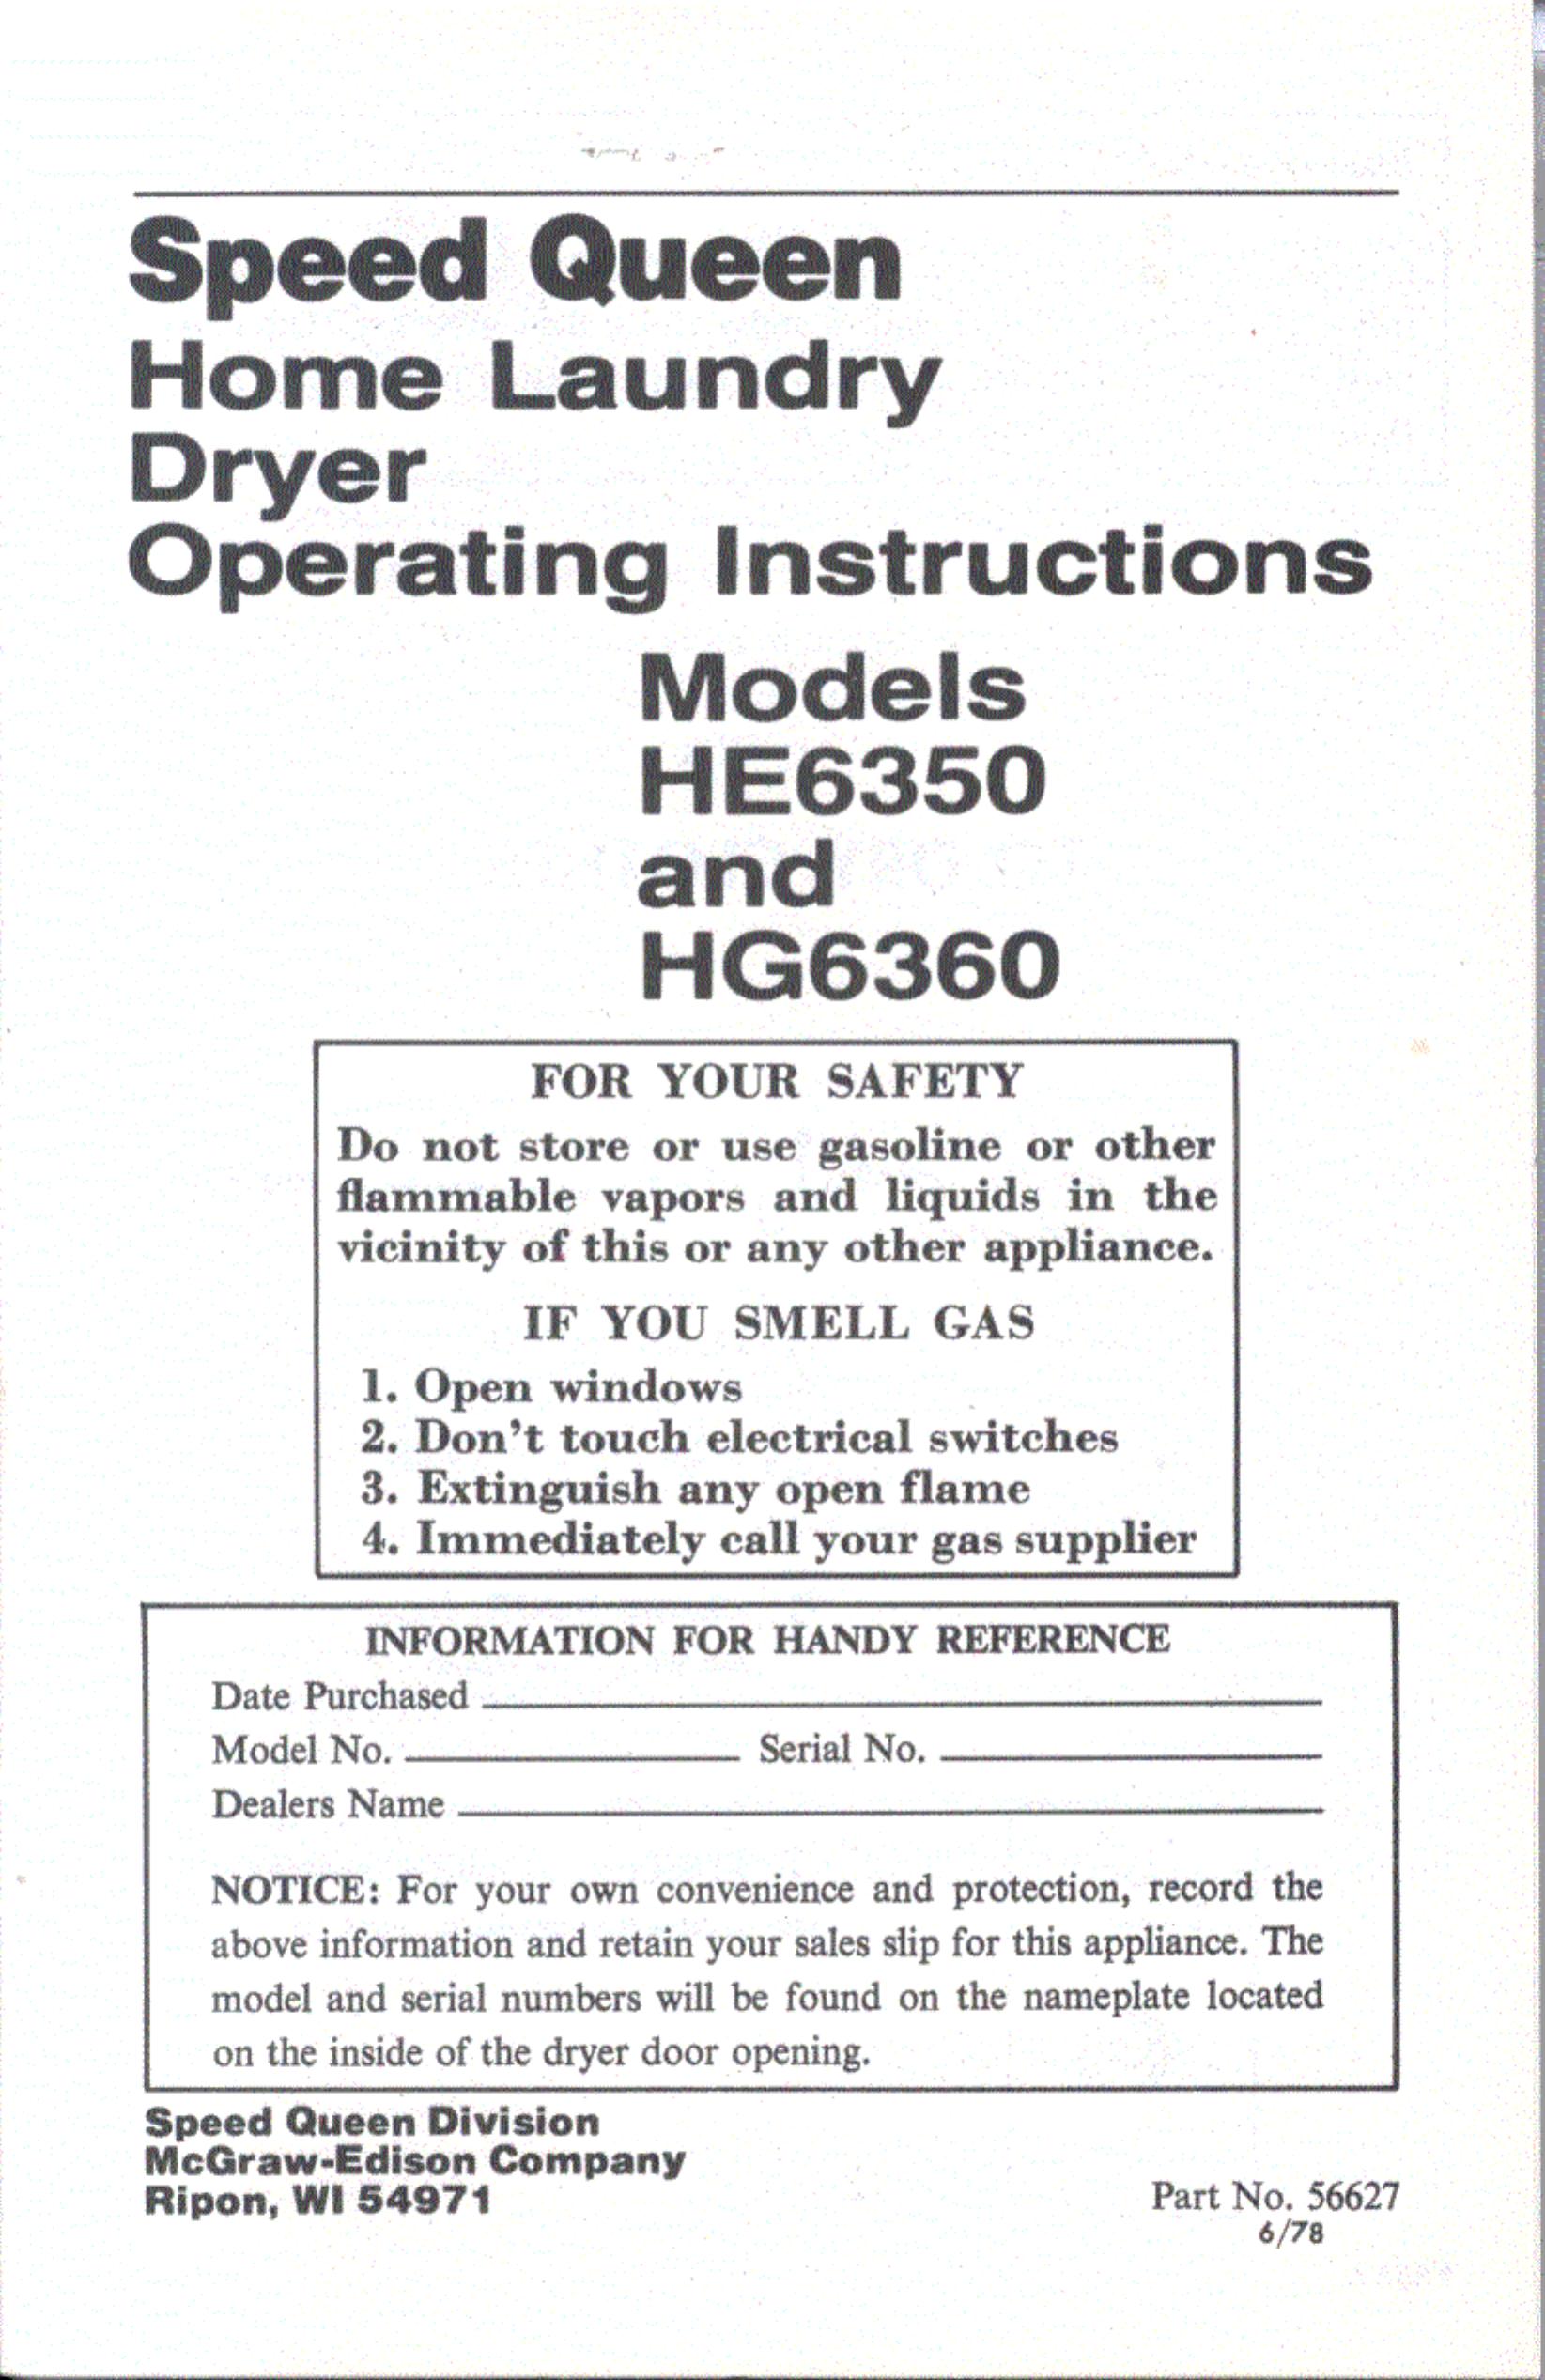 Speed Queen HG6360 Clothes Dryer User Manual